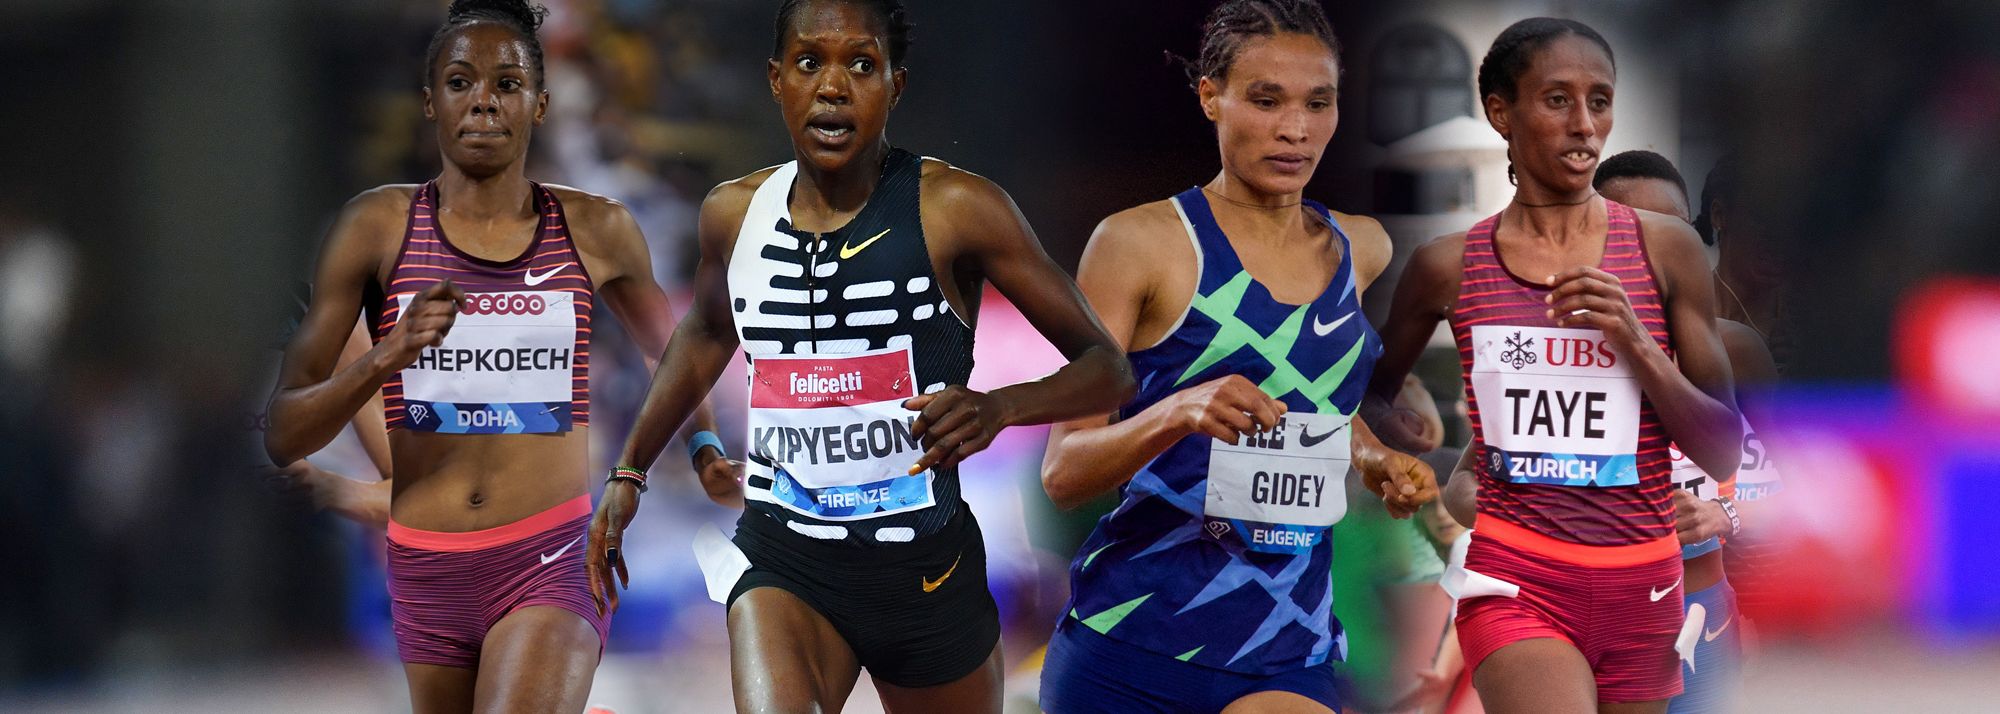 Faith Kipyegon and Sydney McLaughlin-Levrone feature in two mouth-watering clashes